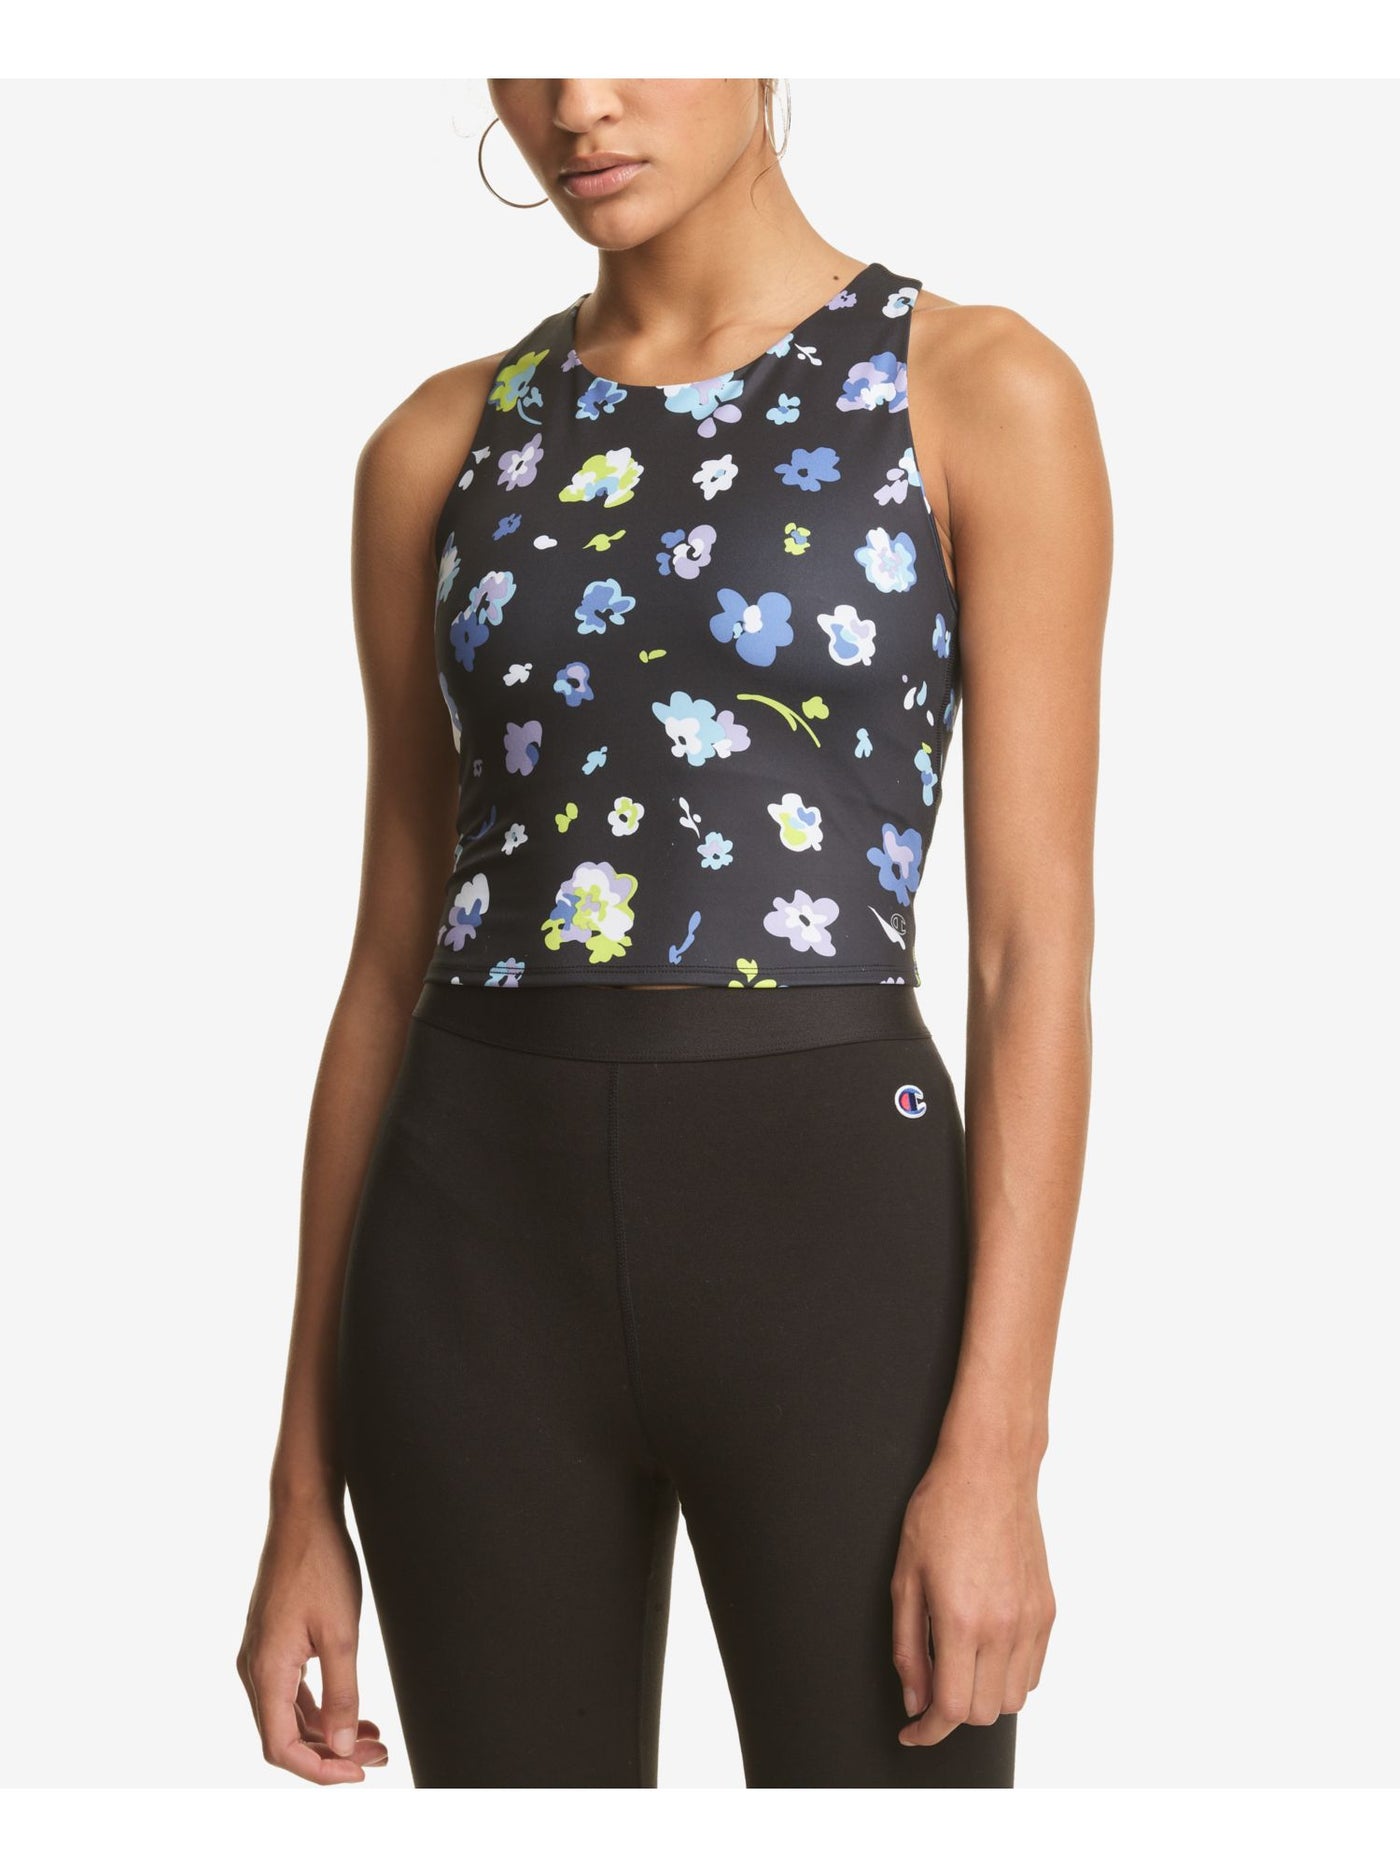 CHAMPION Womens Black Moisture Wicking Racerback Fitted Absolute Printed Sleeveless Scoop Neck Active Wear Crop Top XS